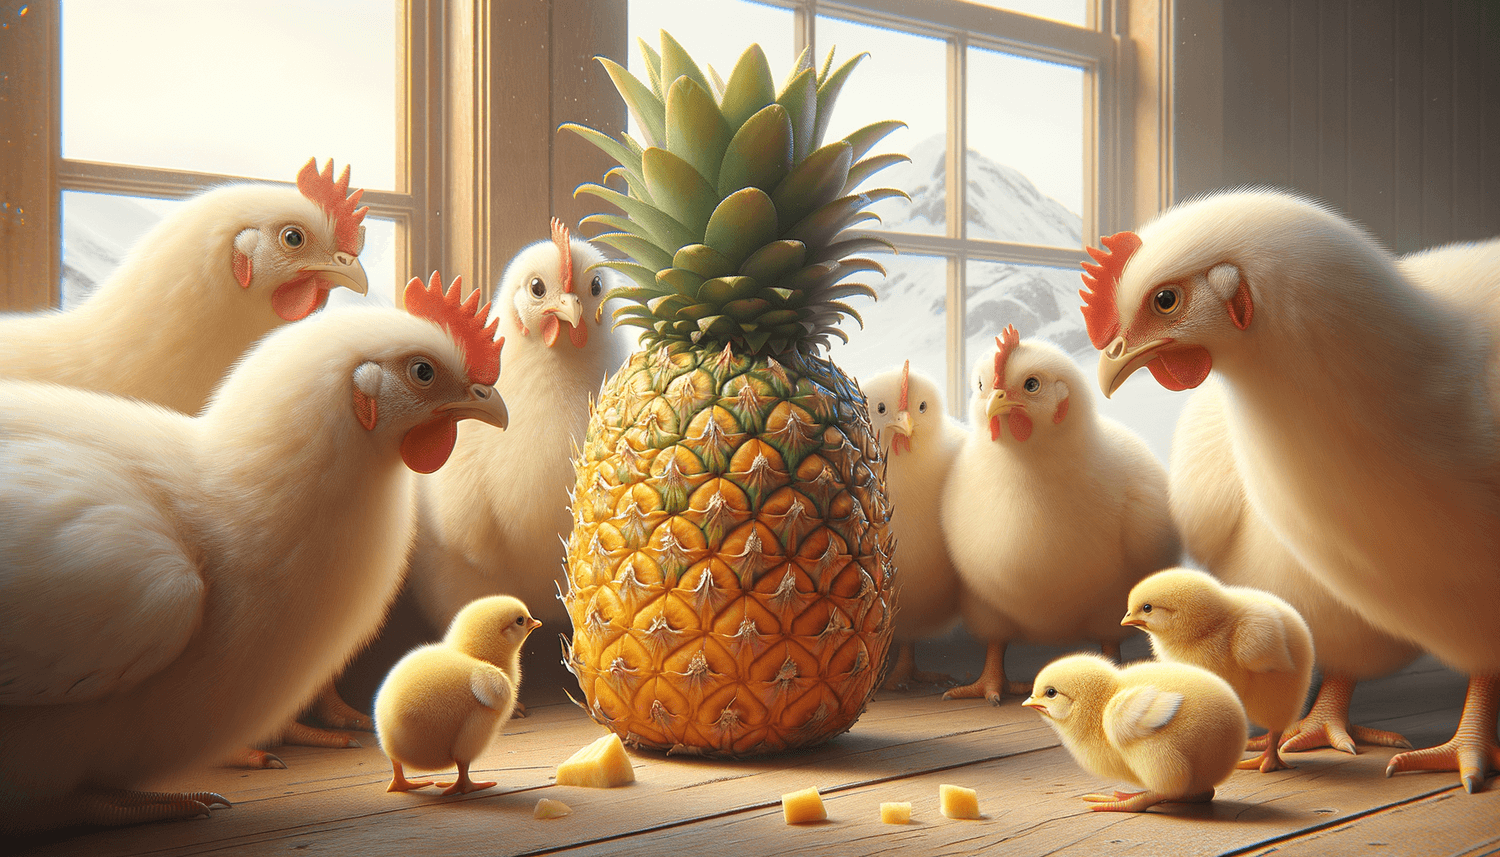 Can Chickens Eat Pineapples?